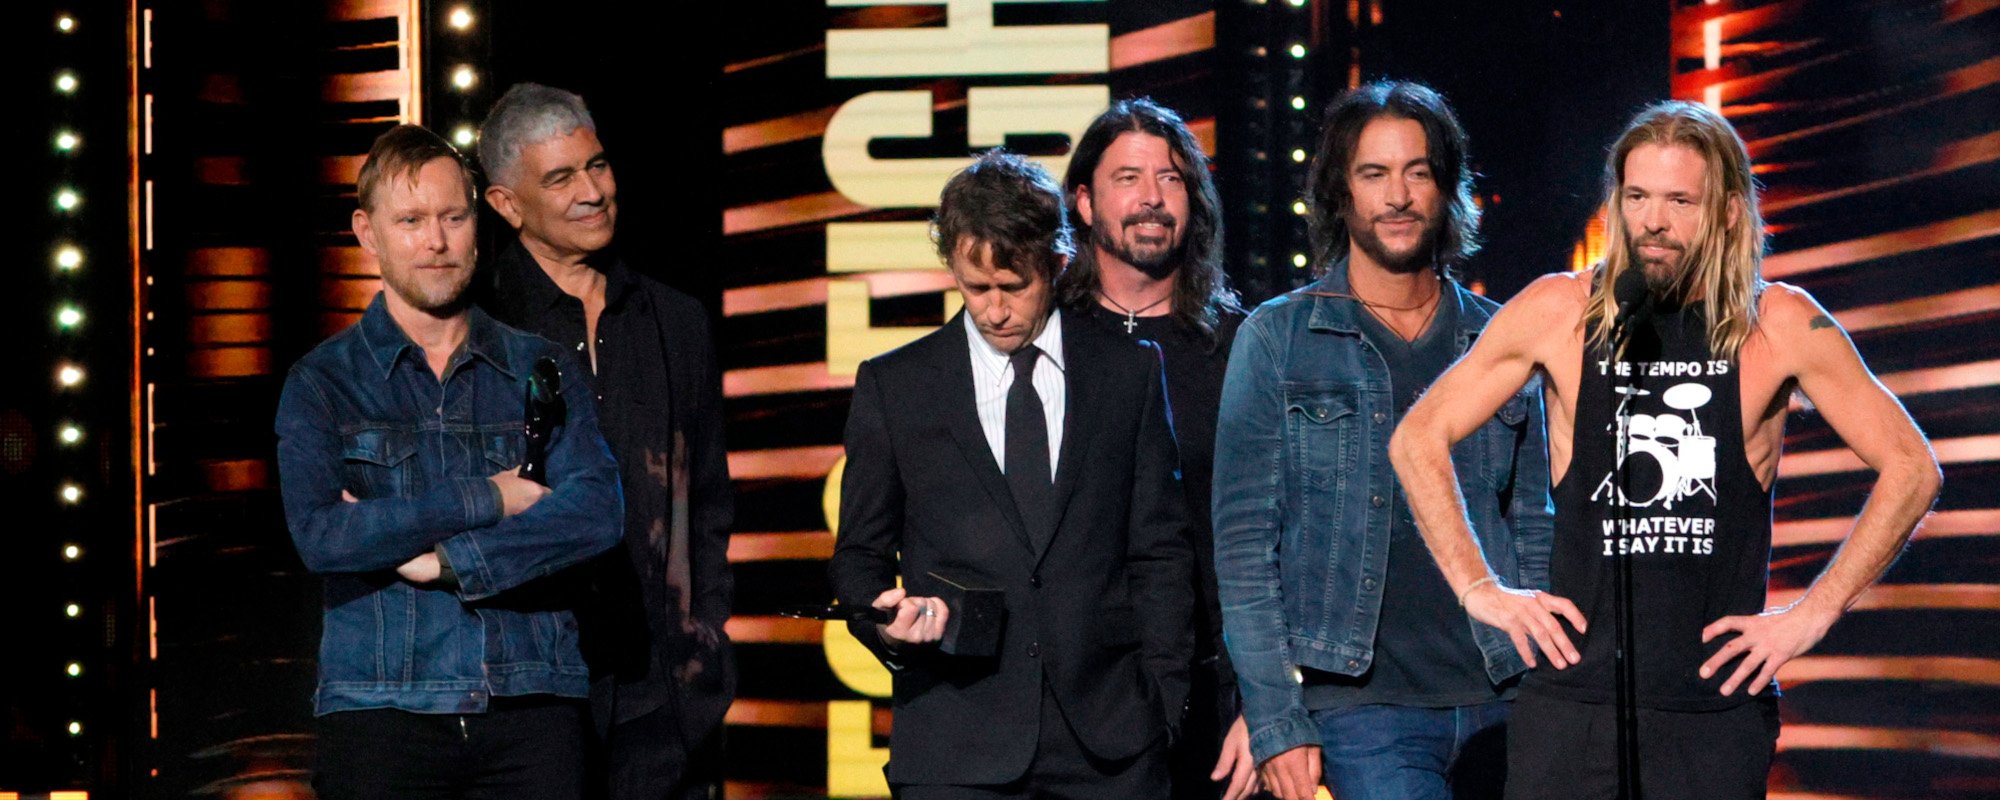 Foo Fighters Pen Message to Fans About “Most Difficult and Tragic Year”